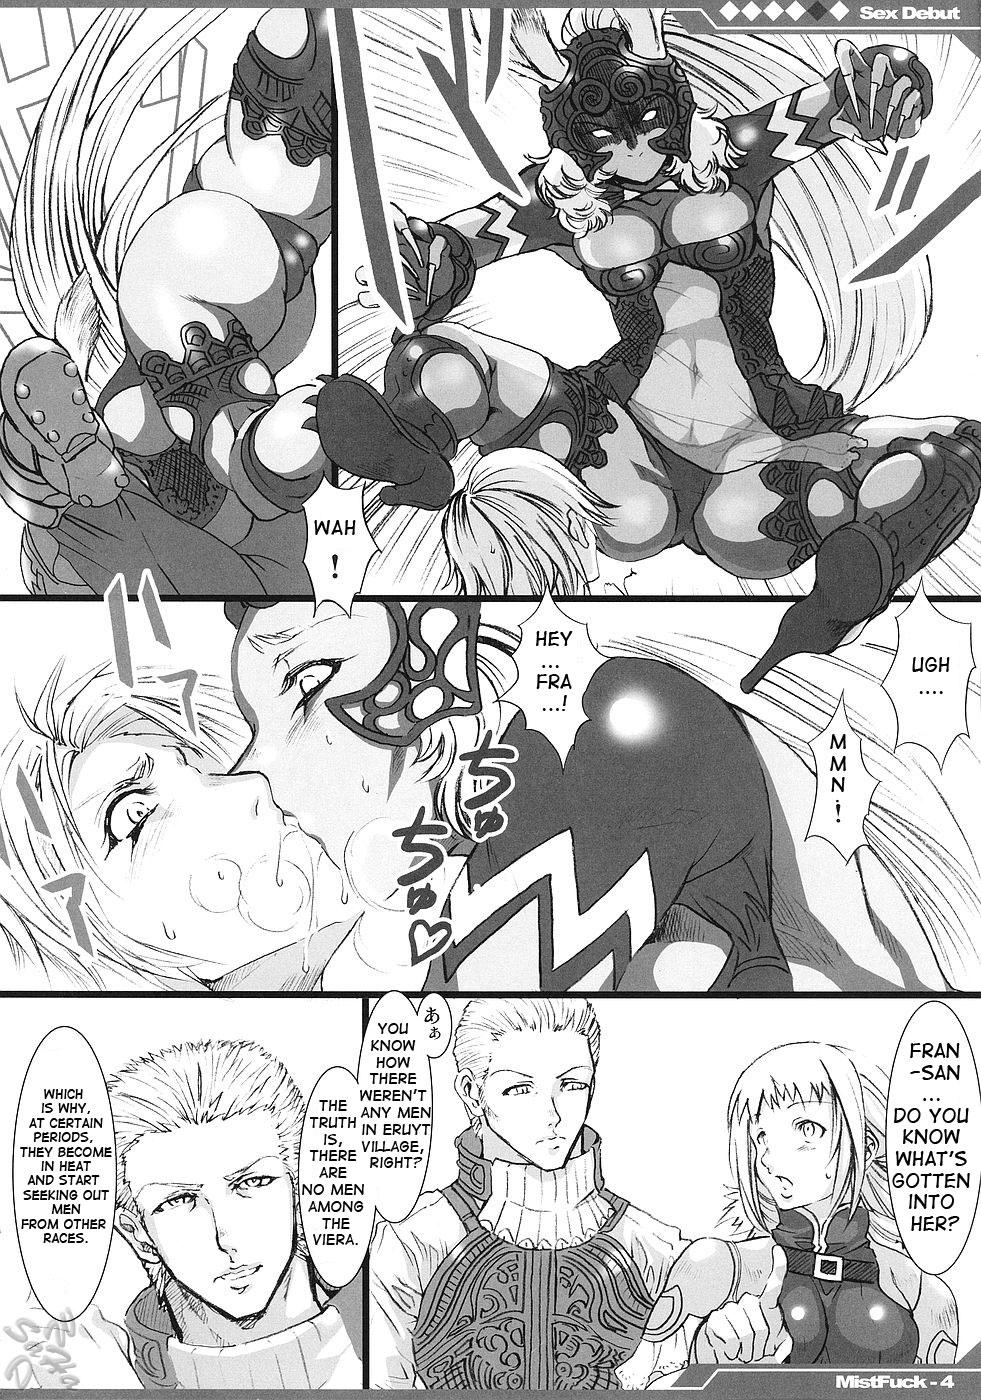 Flaca Kyou Kara Fuuzoku Debut | Today's the Debut of Sex Service - Final fantasy xii Best Blowjob - Page 5